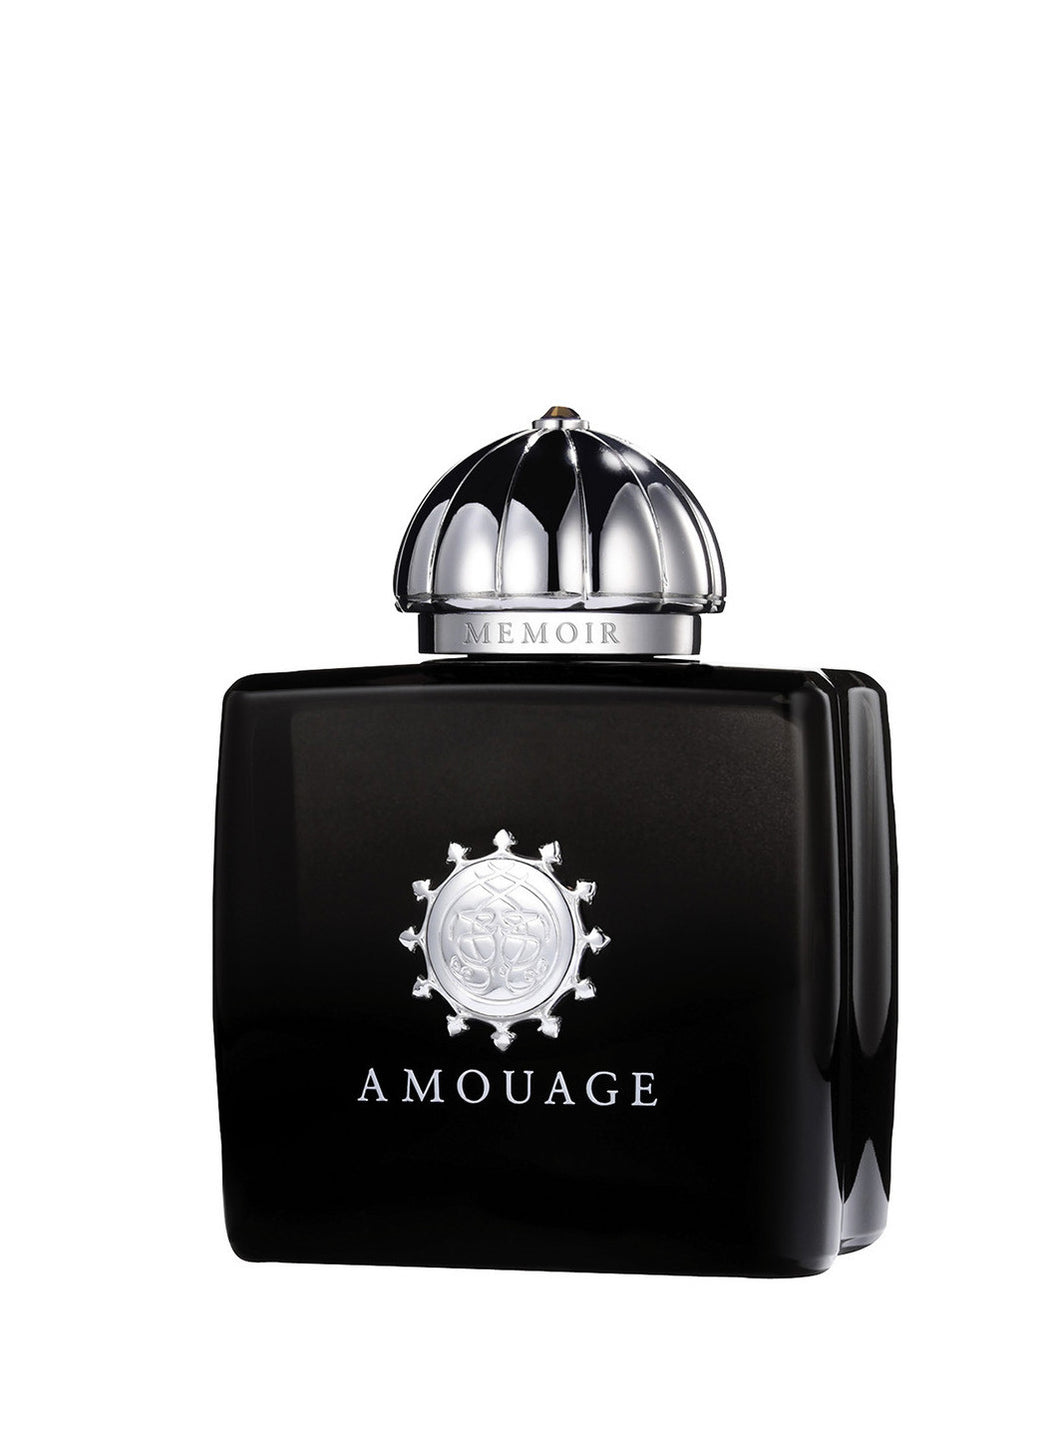 WORLD Beauty's Collection of Luxury Fragrances